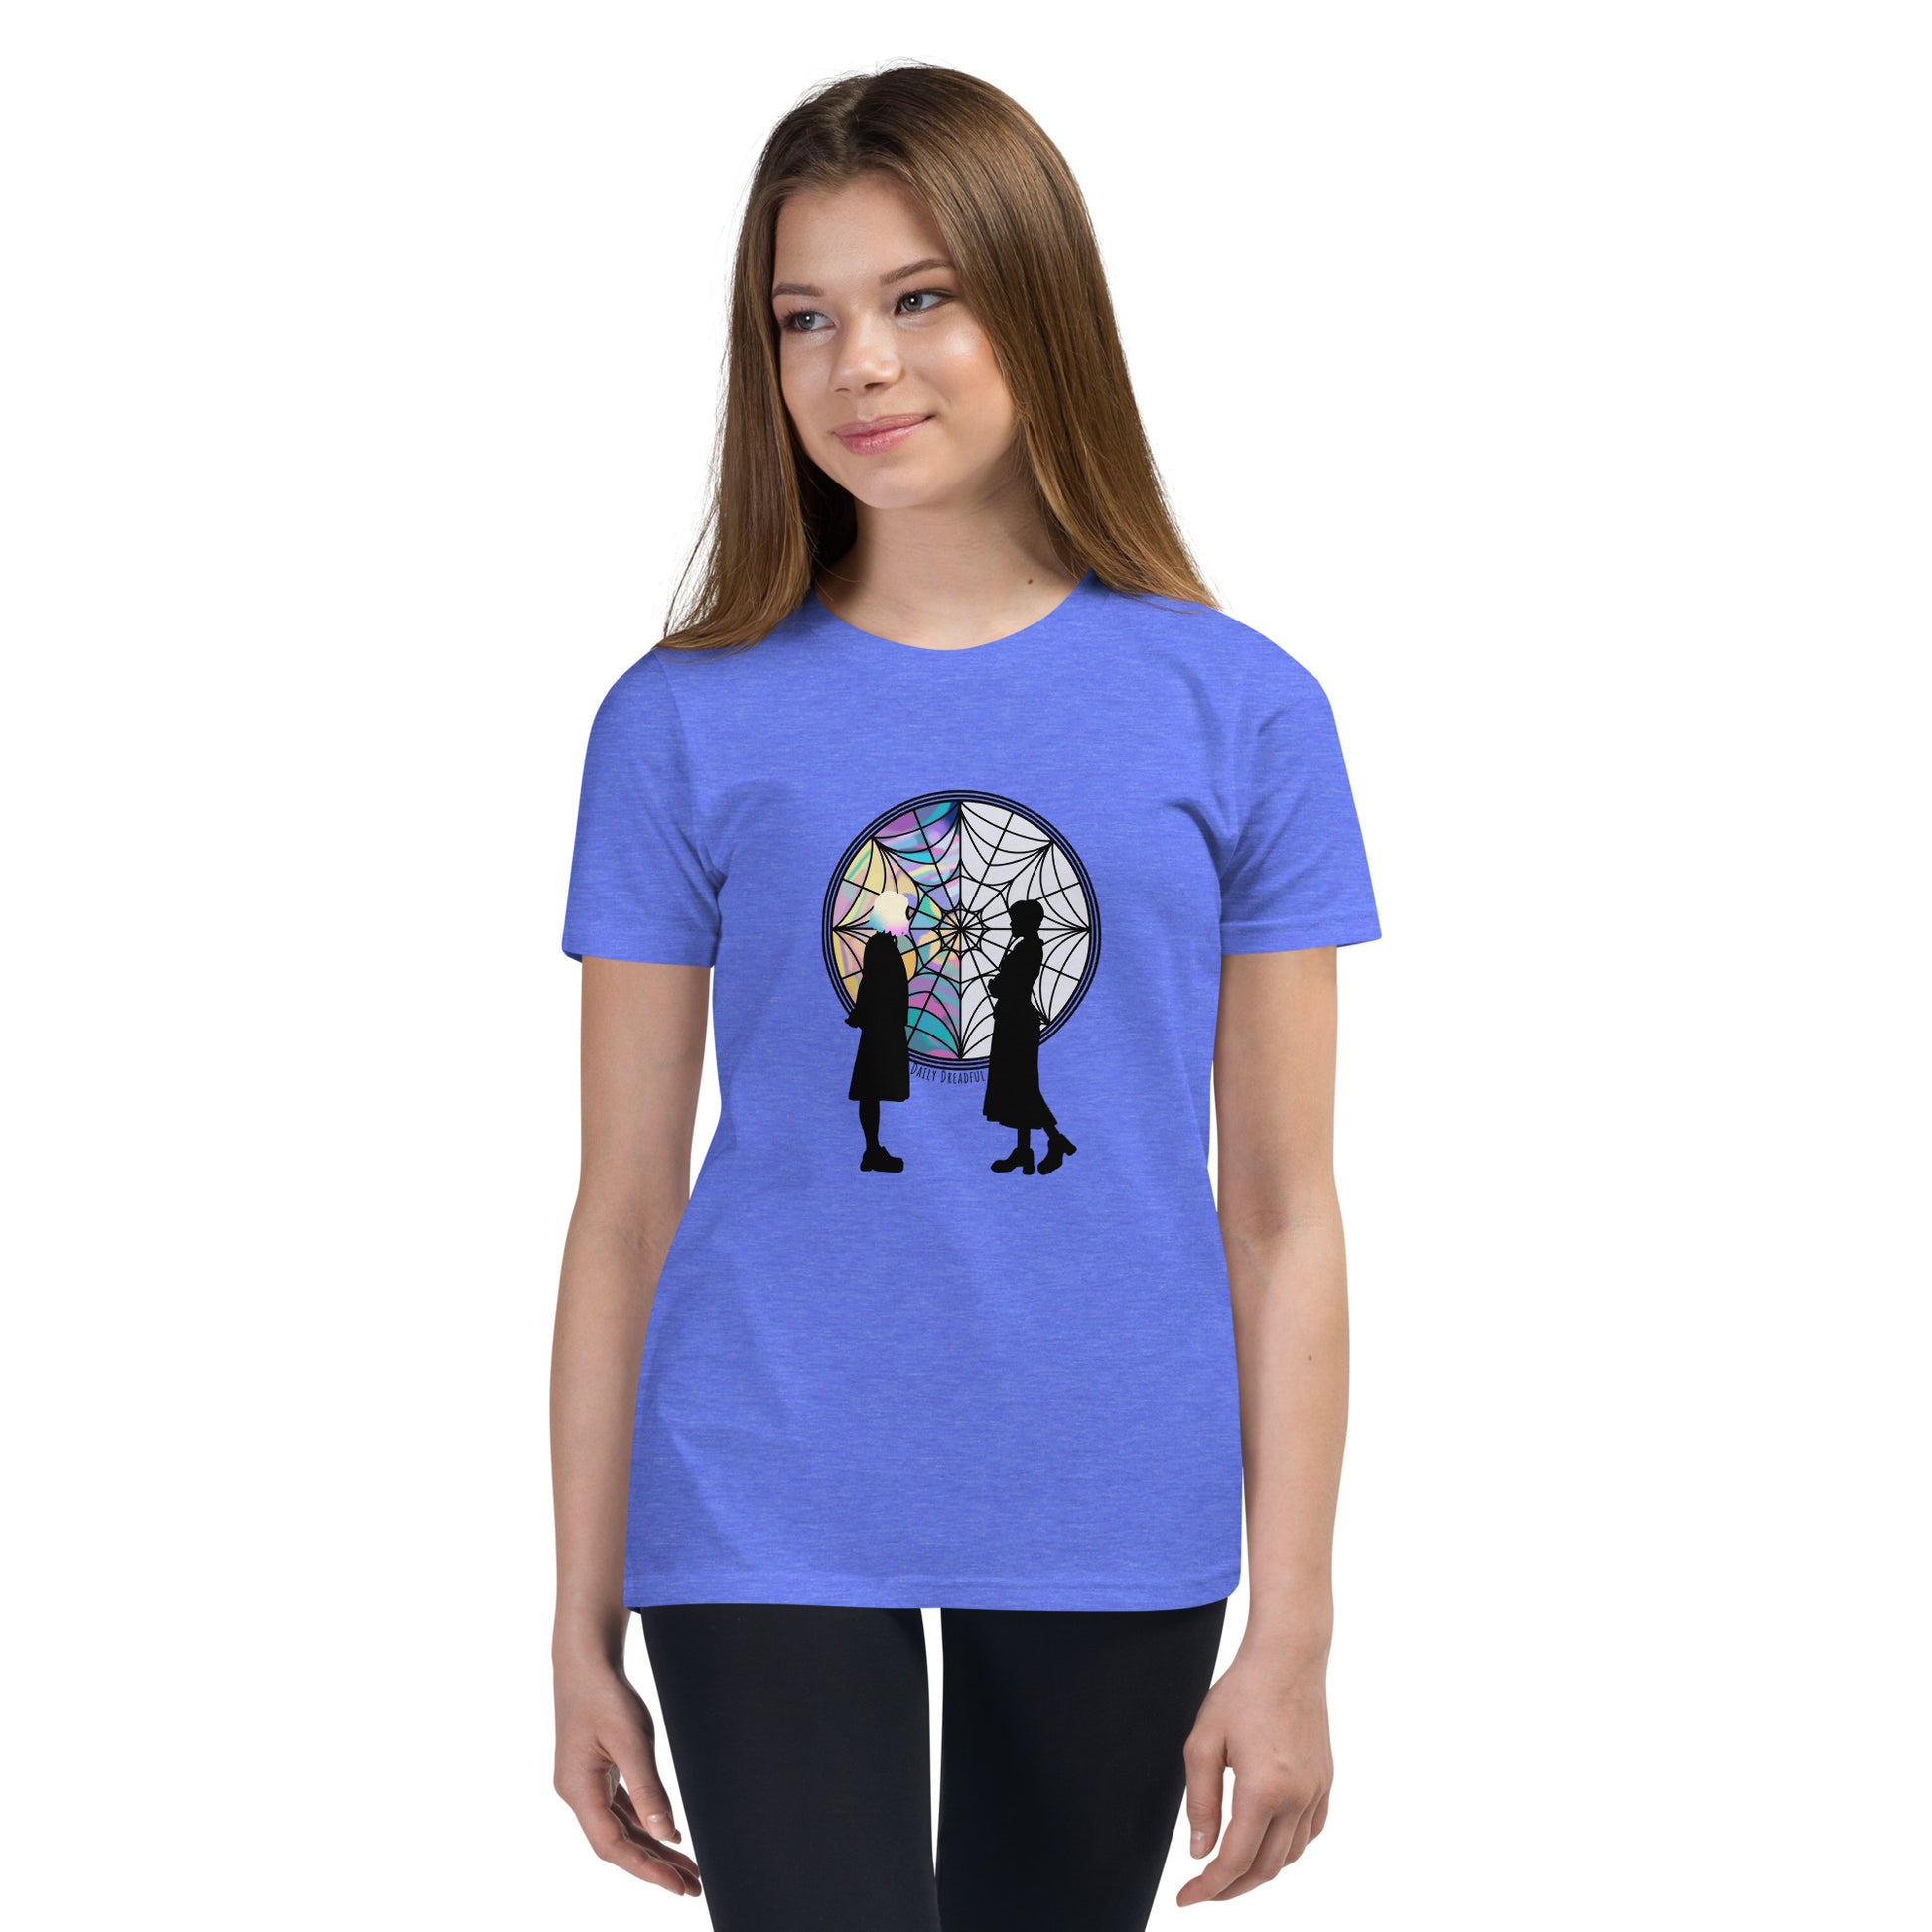 heather columbia "Wednesday Addams and Enid" Youth Short Sleeve T-Shirt from Daily Dreadful